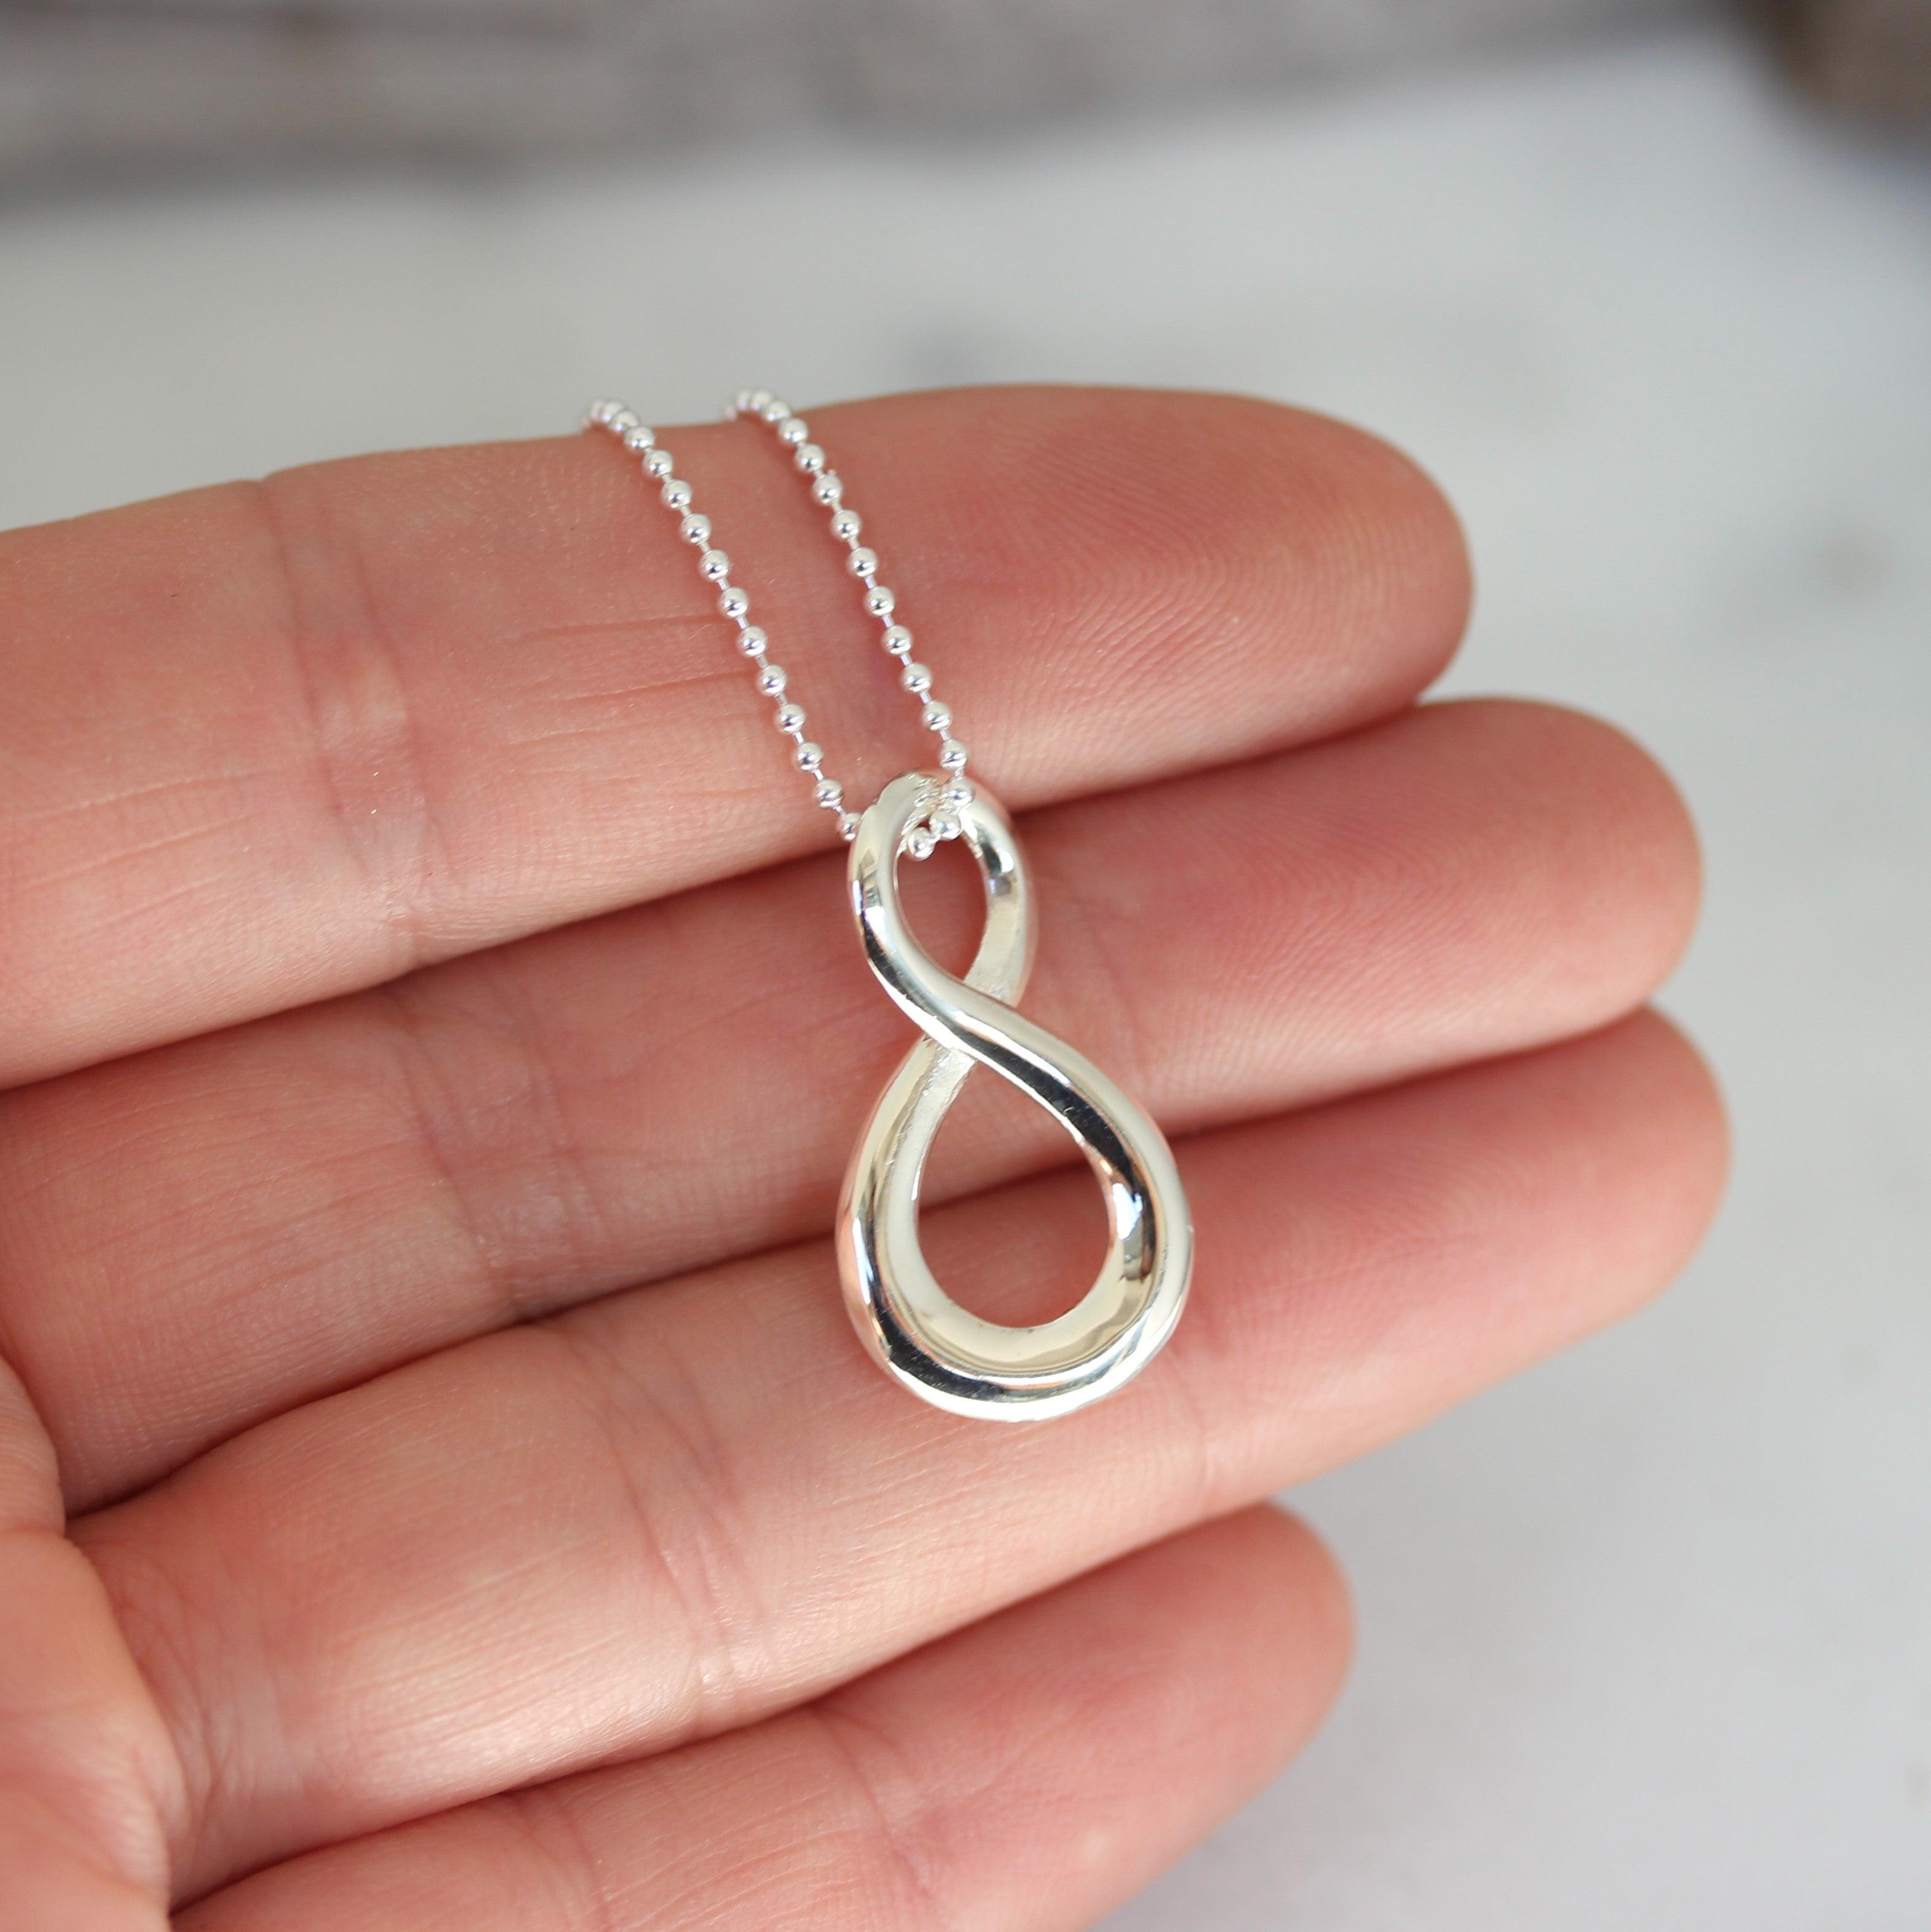 Sterling Silver Infinity Pendant & Bead Ball Chain Necklace - STERLING SILVER DESIGNS